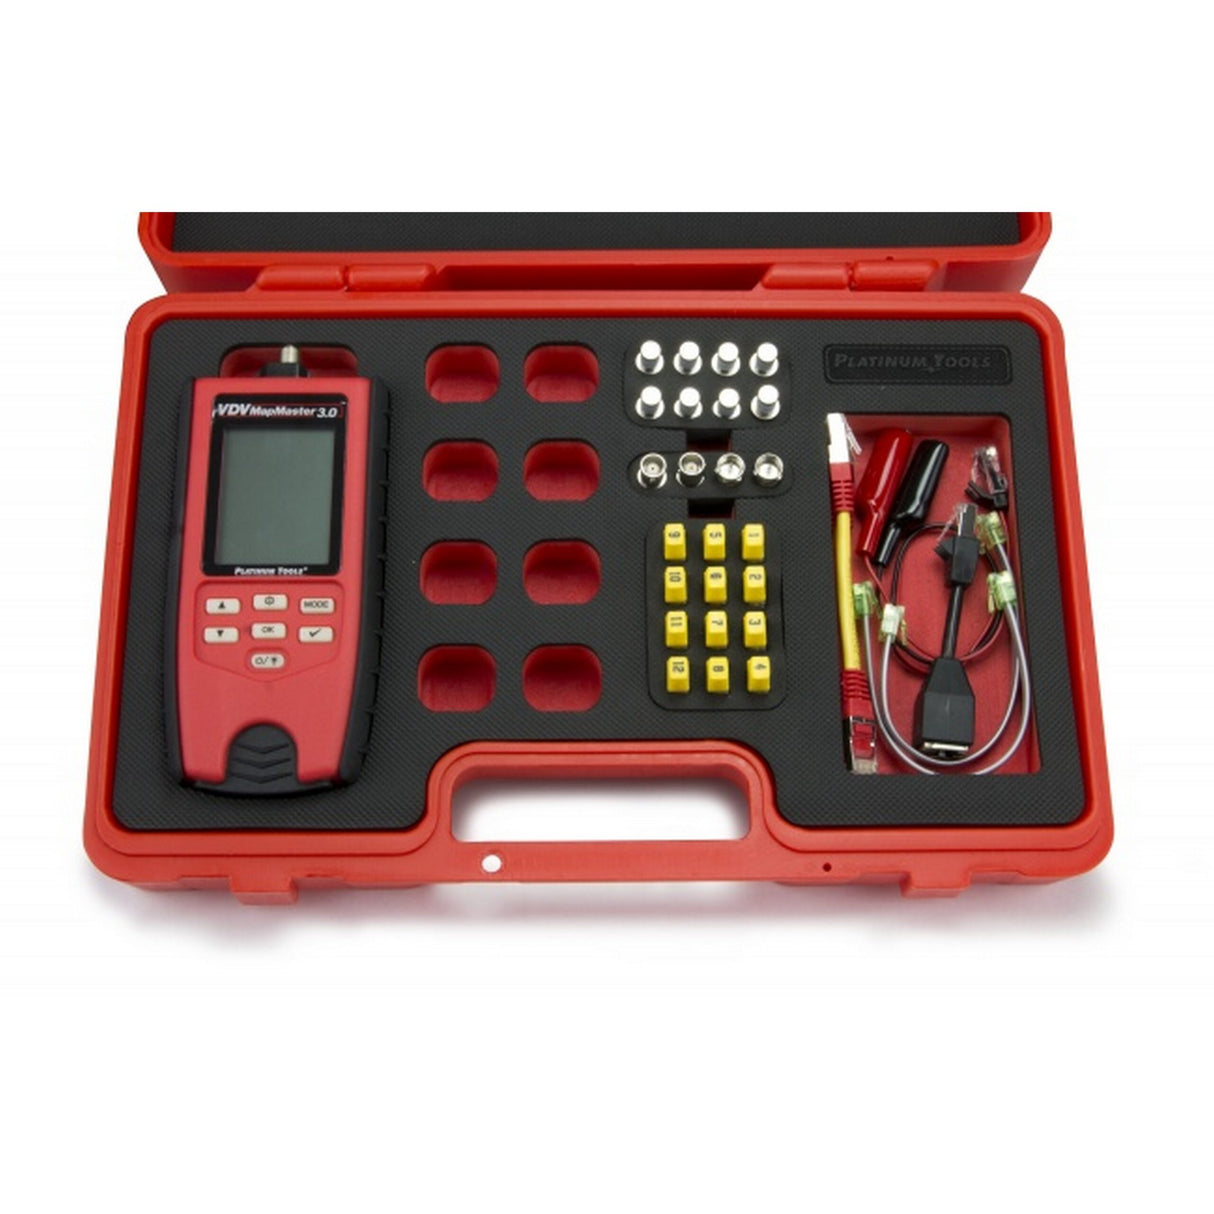 Platinum Tools T130K4 VDV MapMaster 3.0 Network and Coax Cable Mapping Field Kit with Durable Case